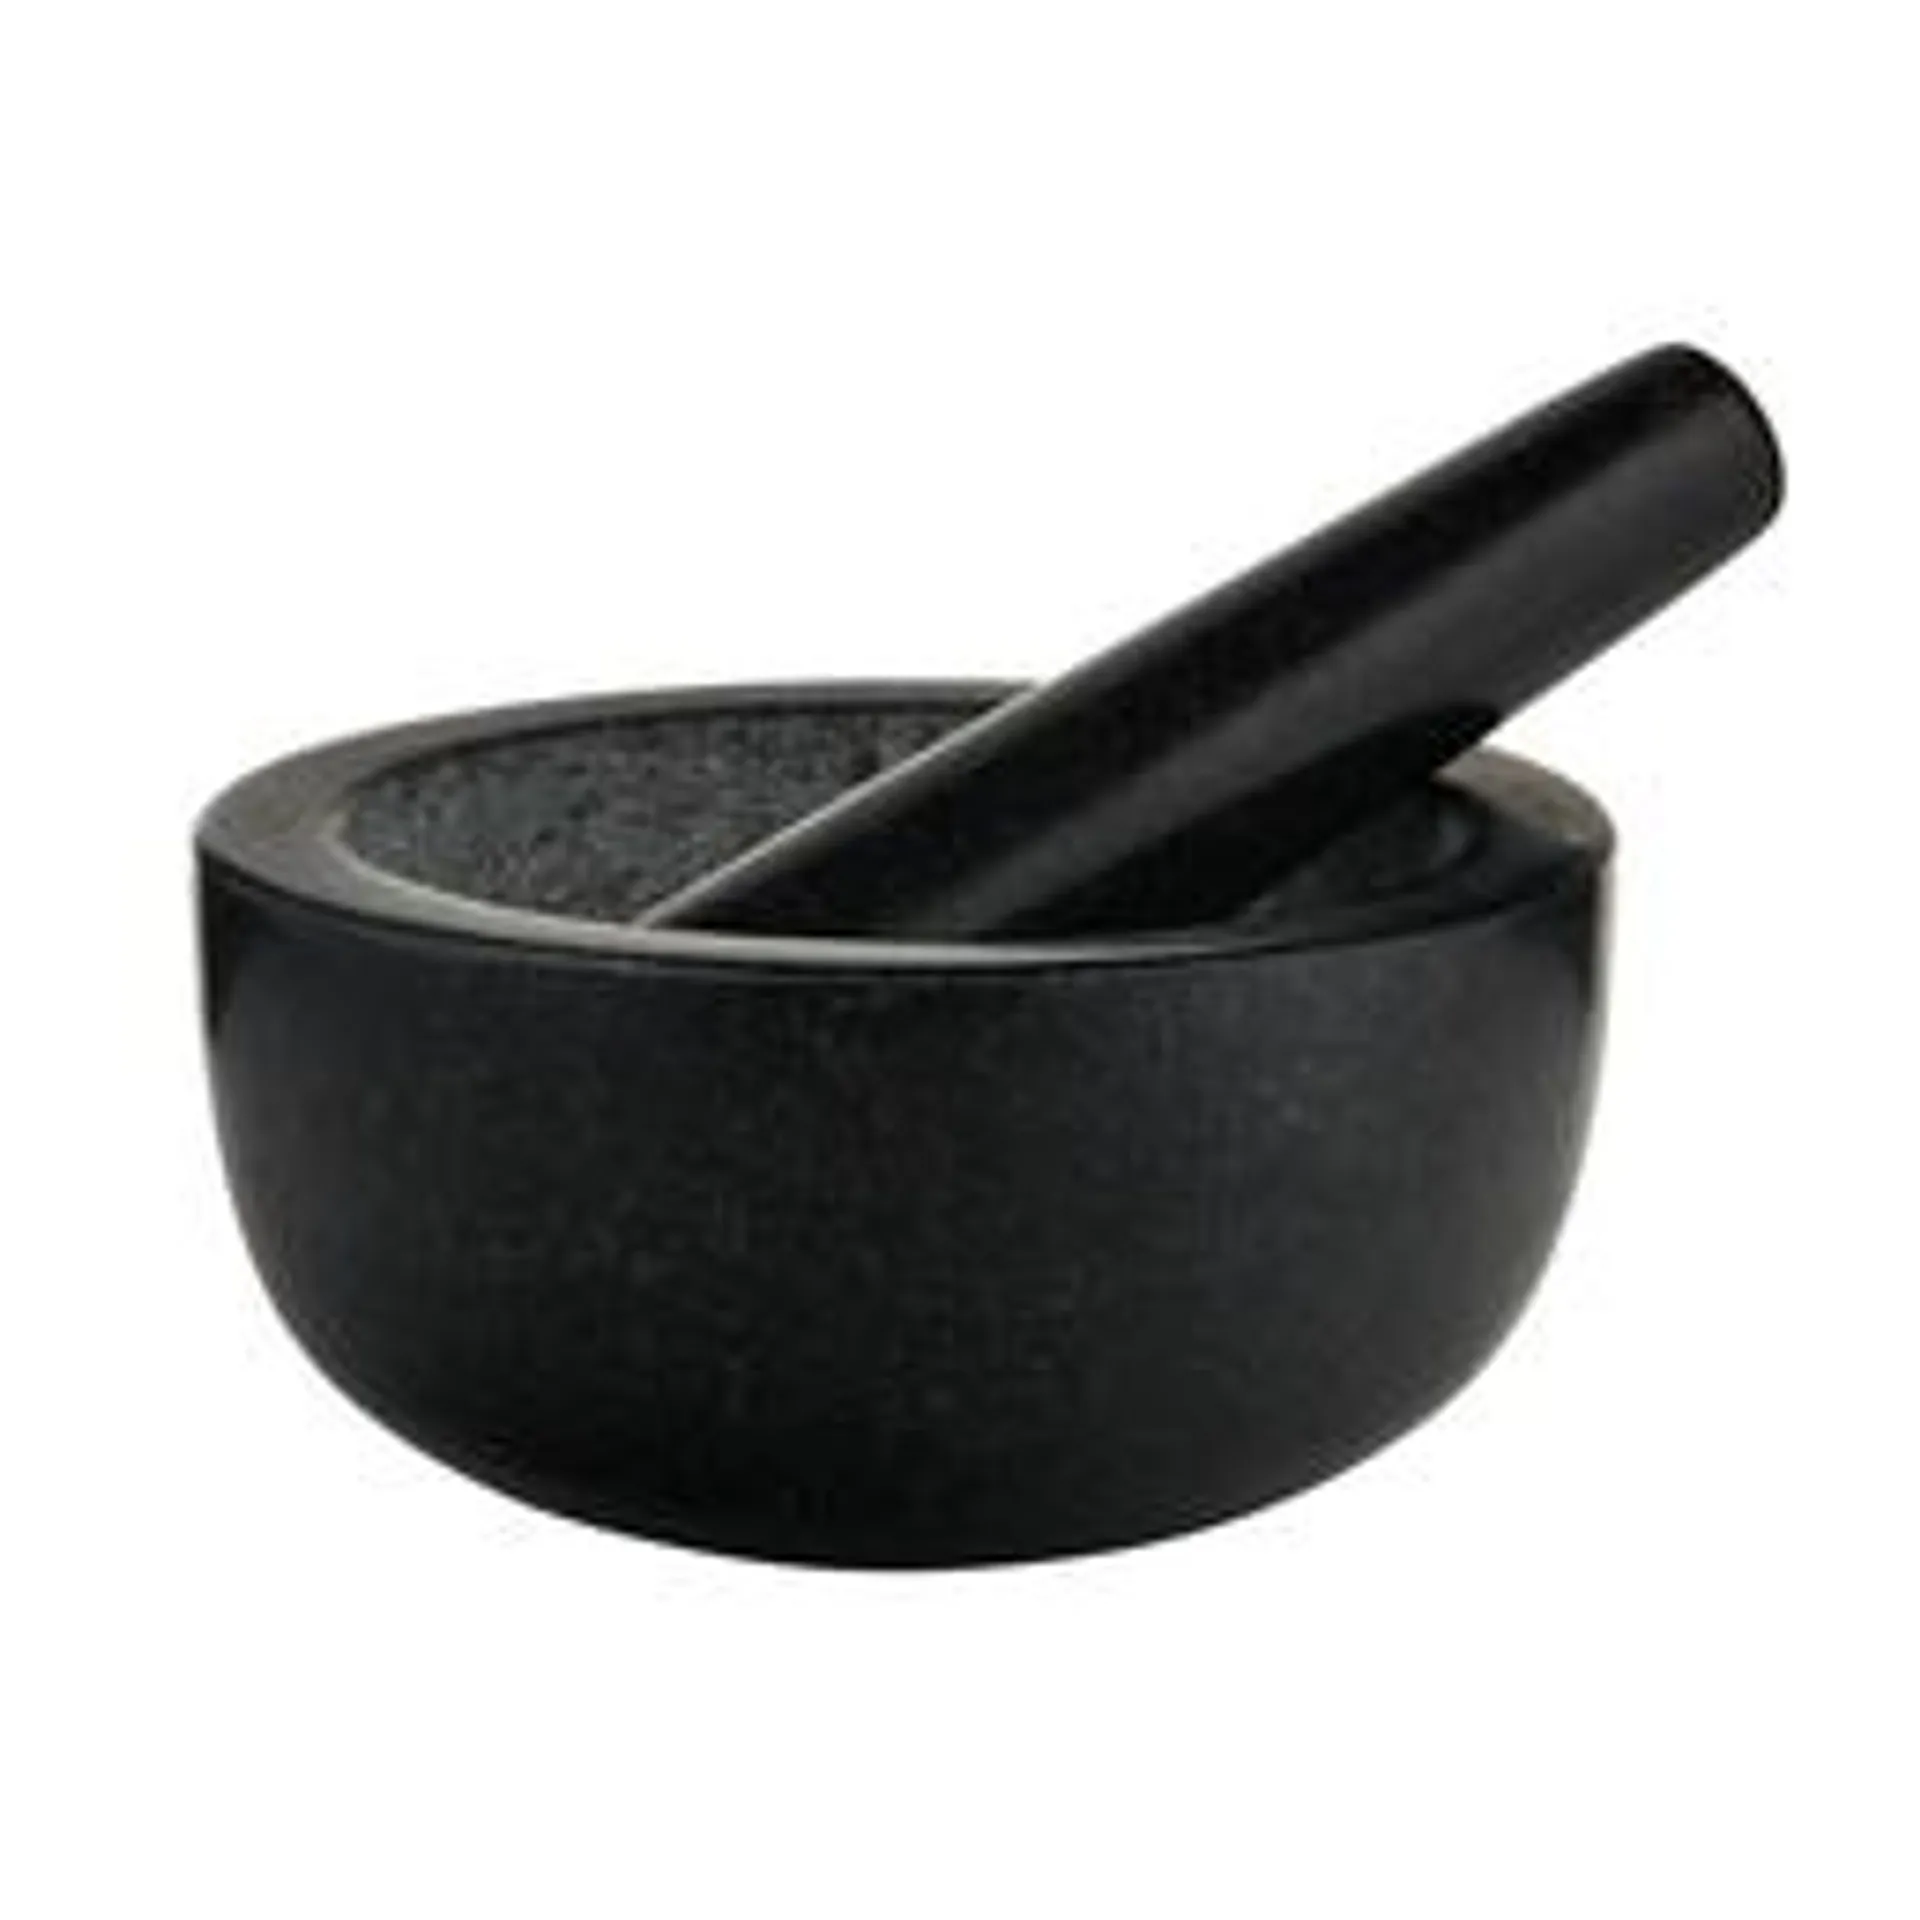 Capital Kitchen Mortar and Pestle, 18.5 x 9cm